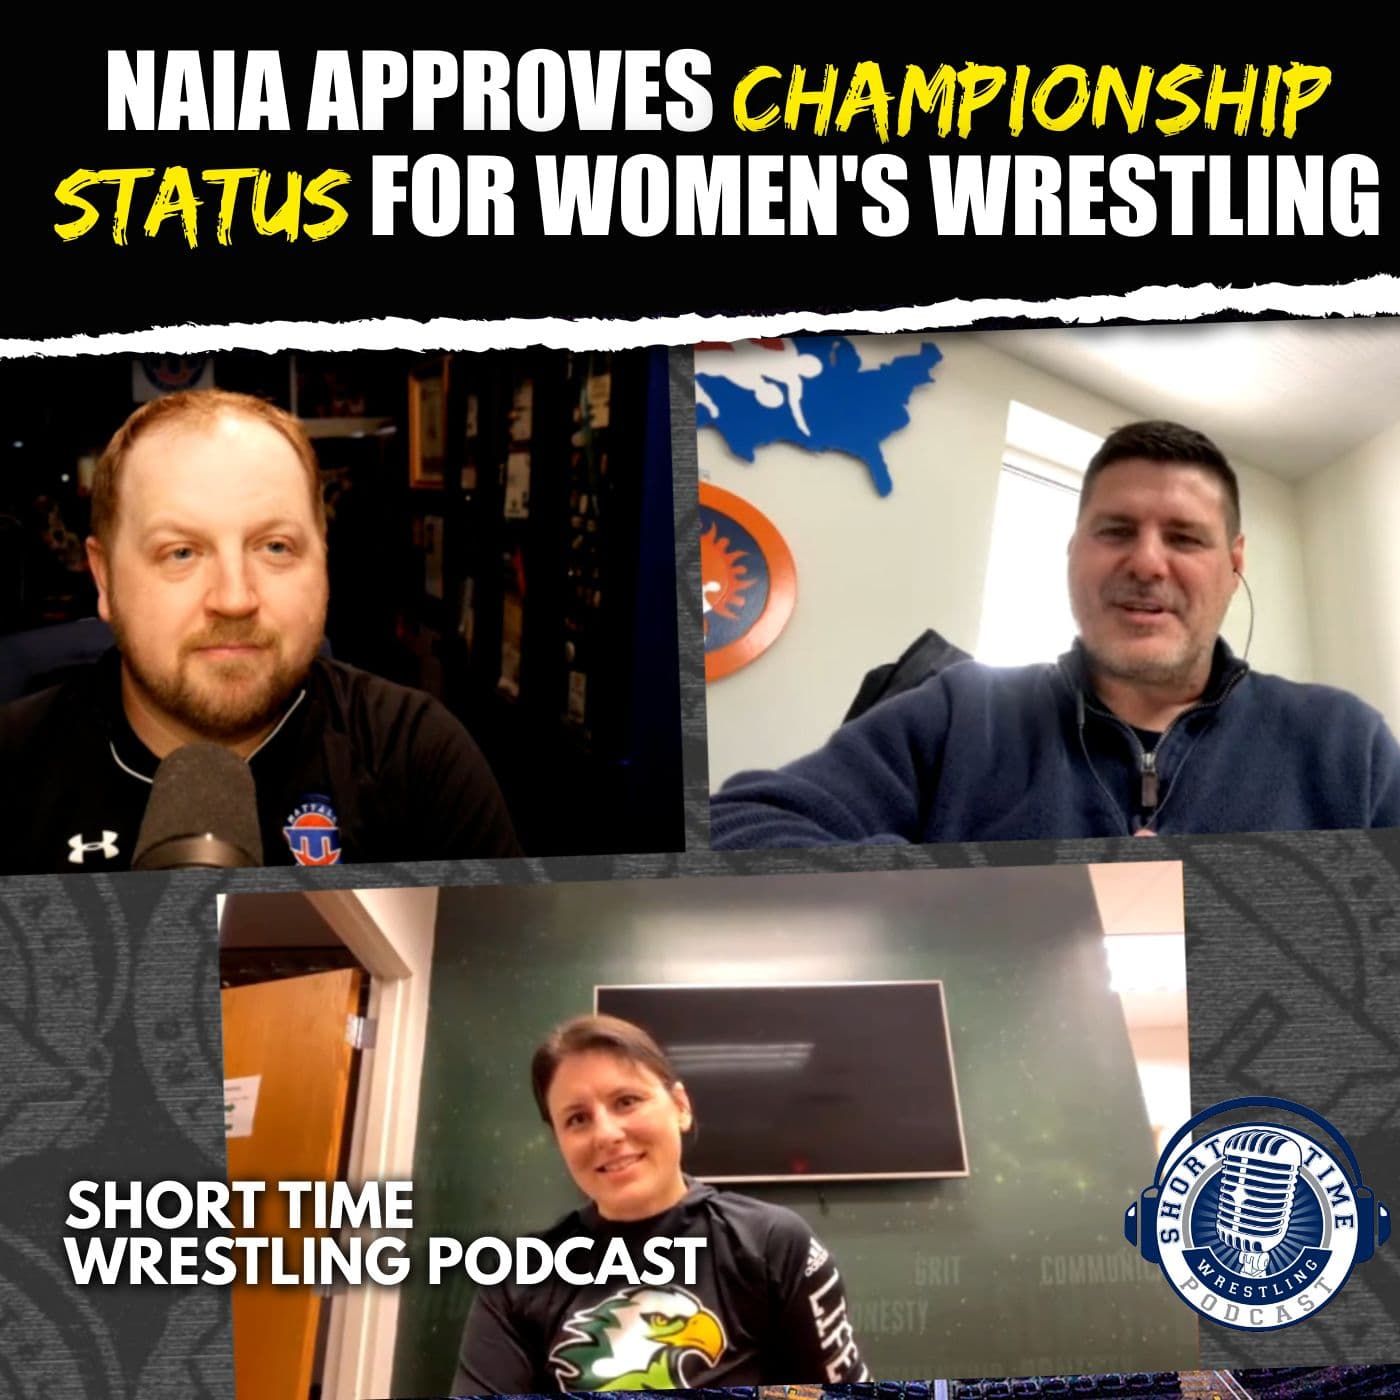 Coach reactions as NAIA approves women's wrestling for championship status